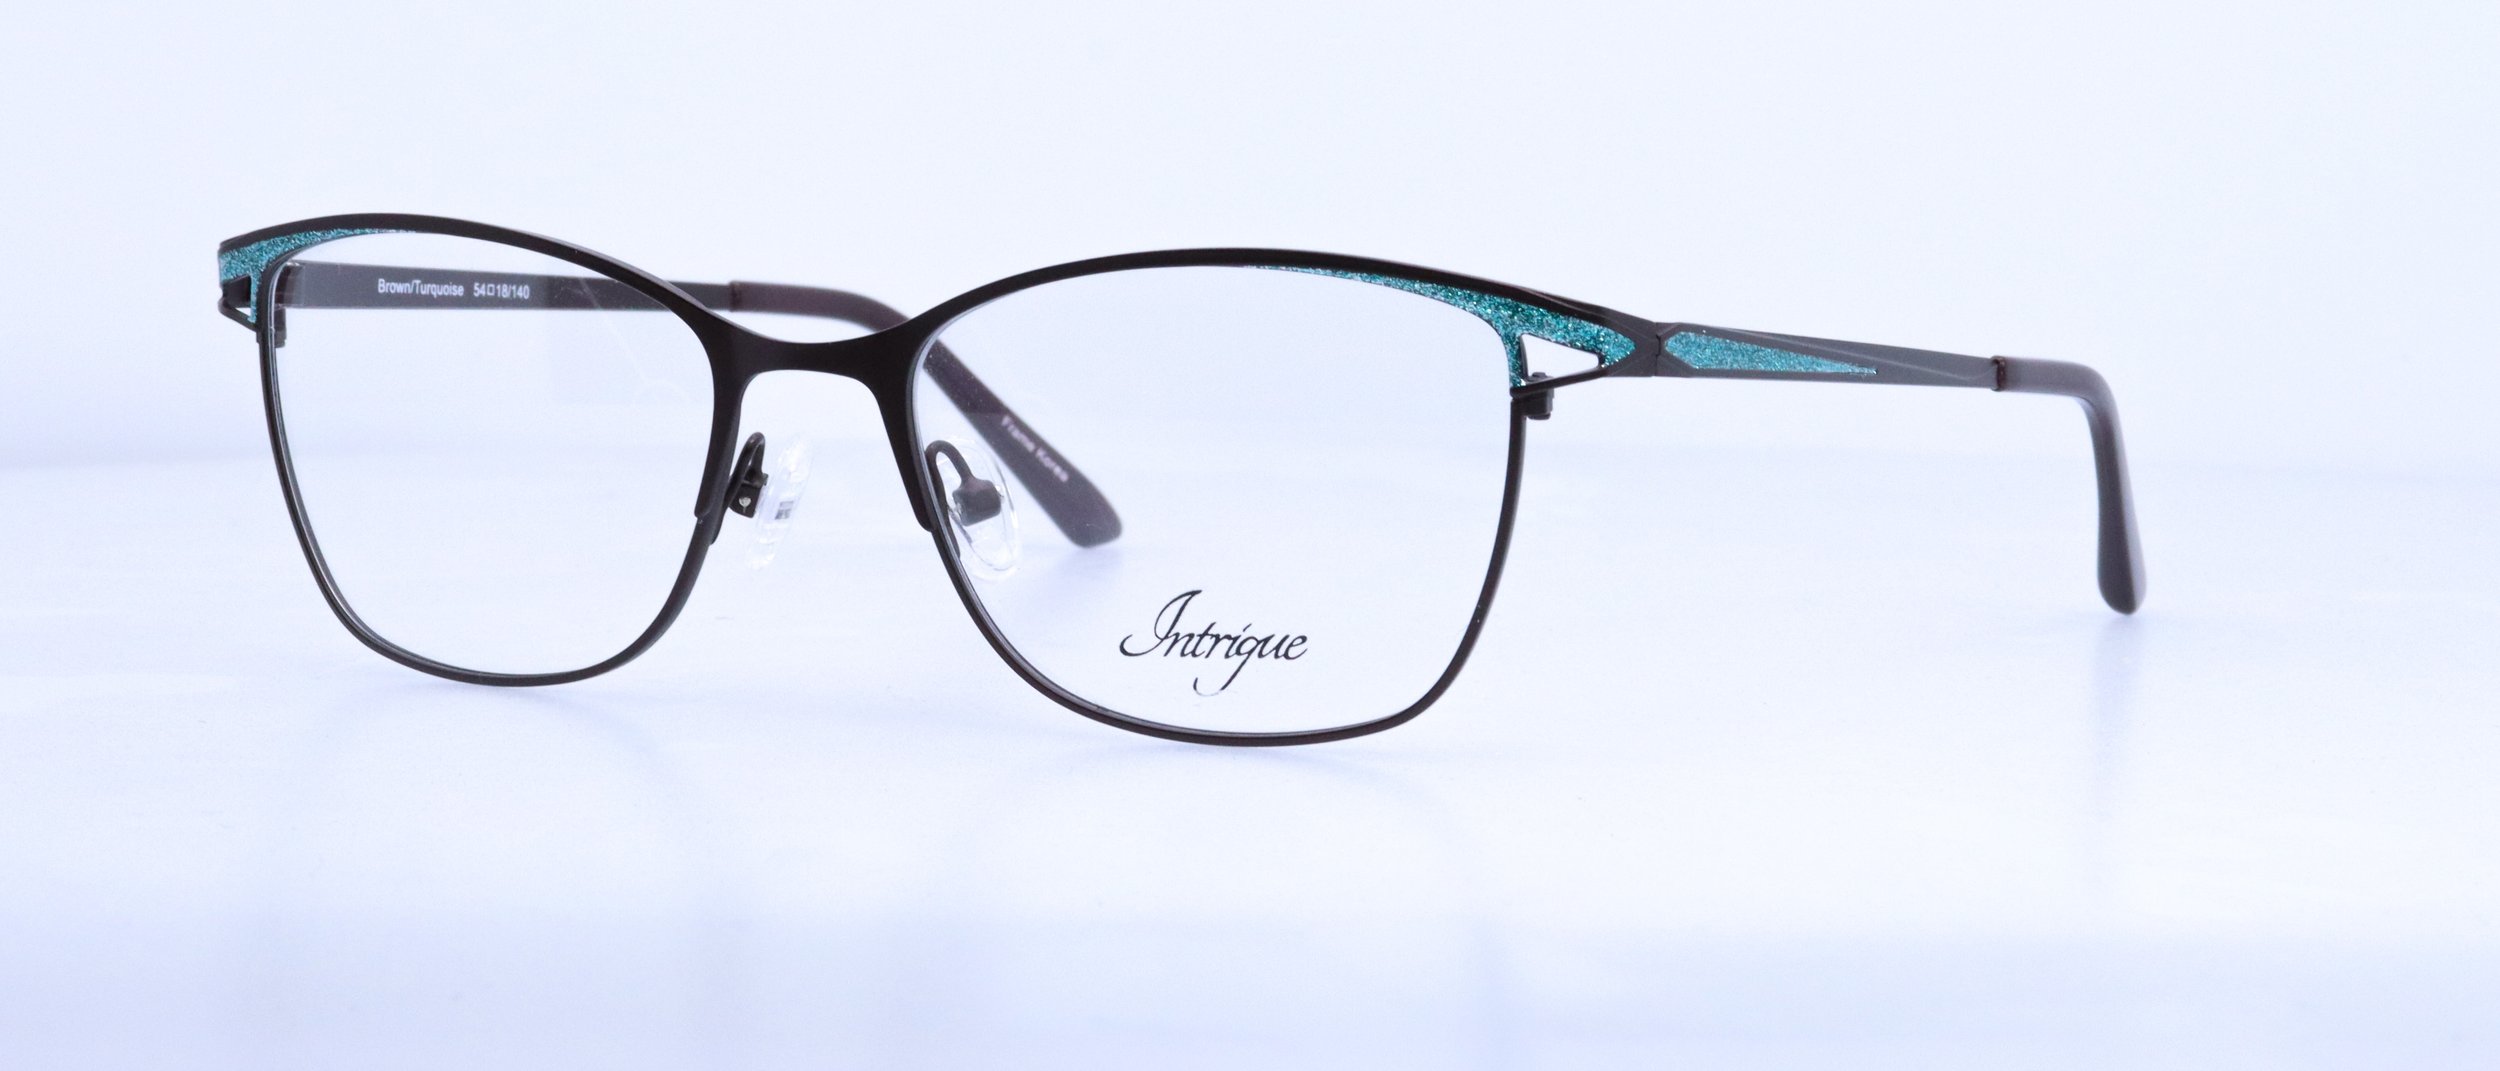  NEW!! INT230: 54-18-140, Available in Black/Red or Brown/Turquoise 